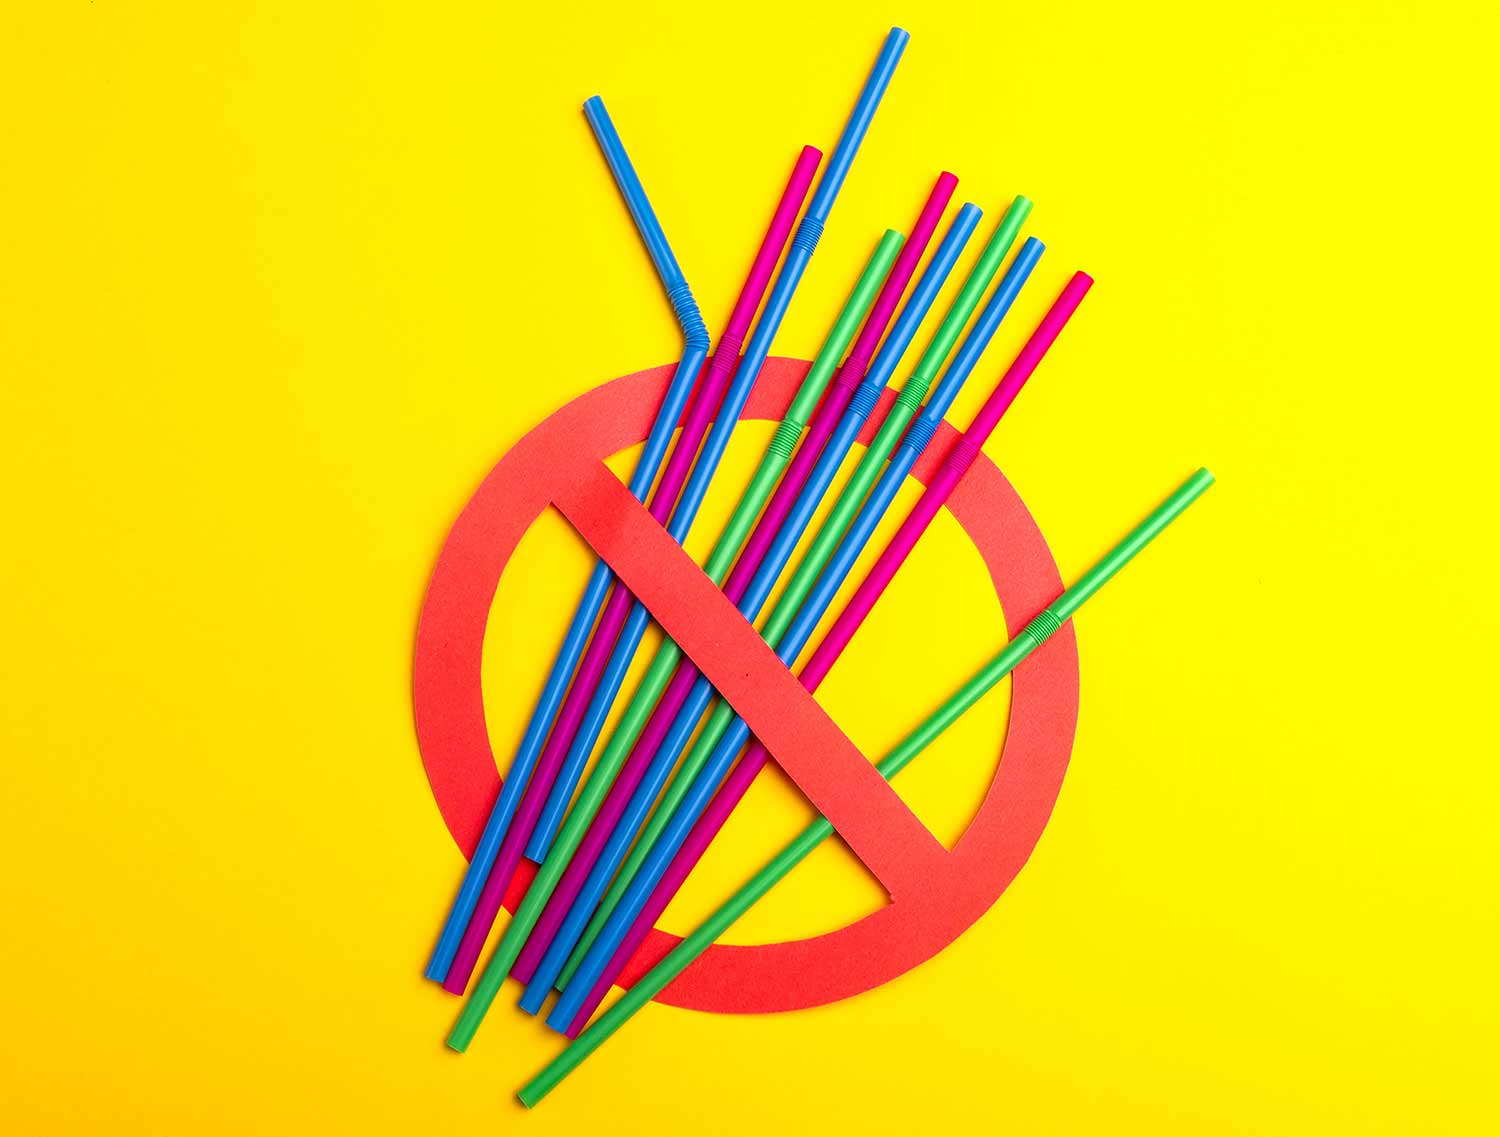 Different colored plastic straws with international symbol for No.